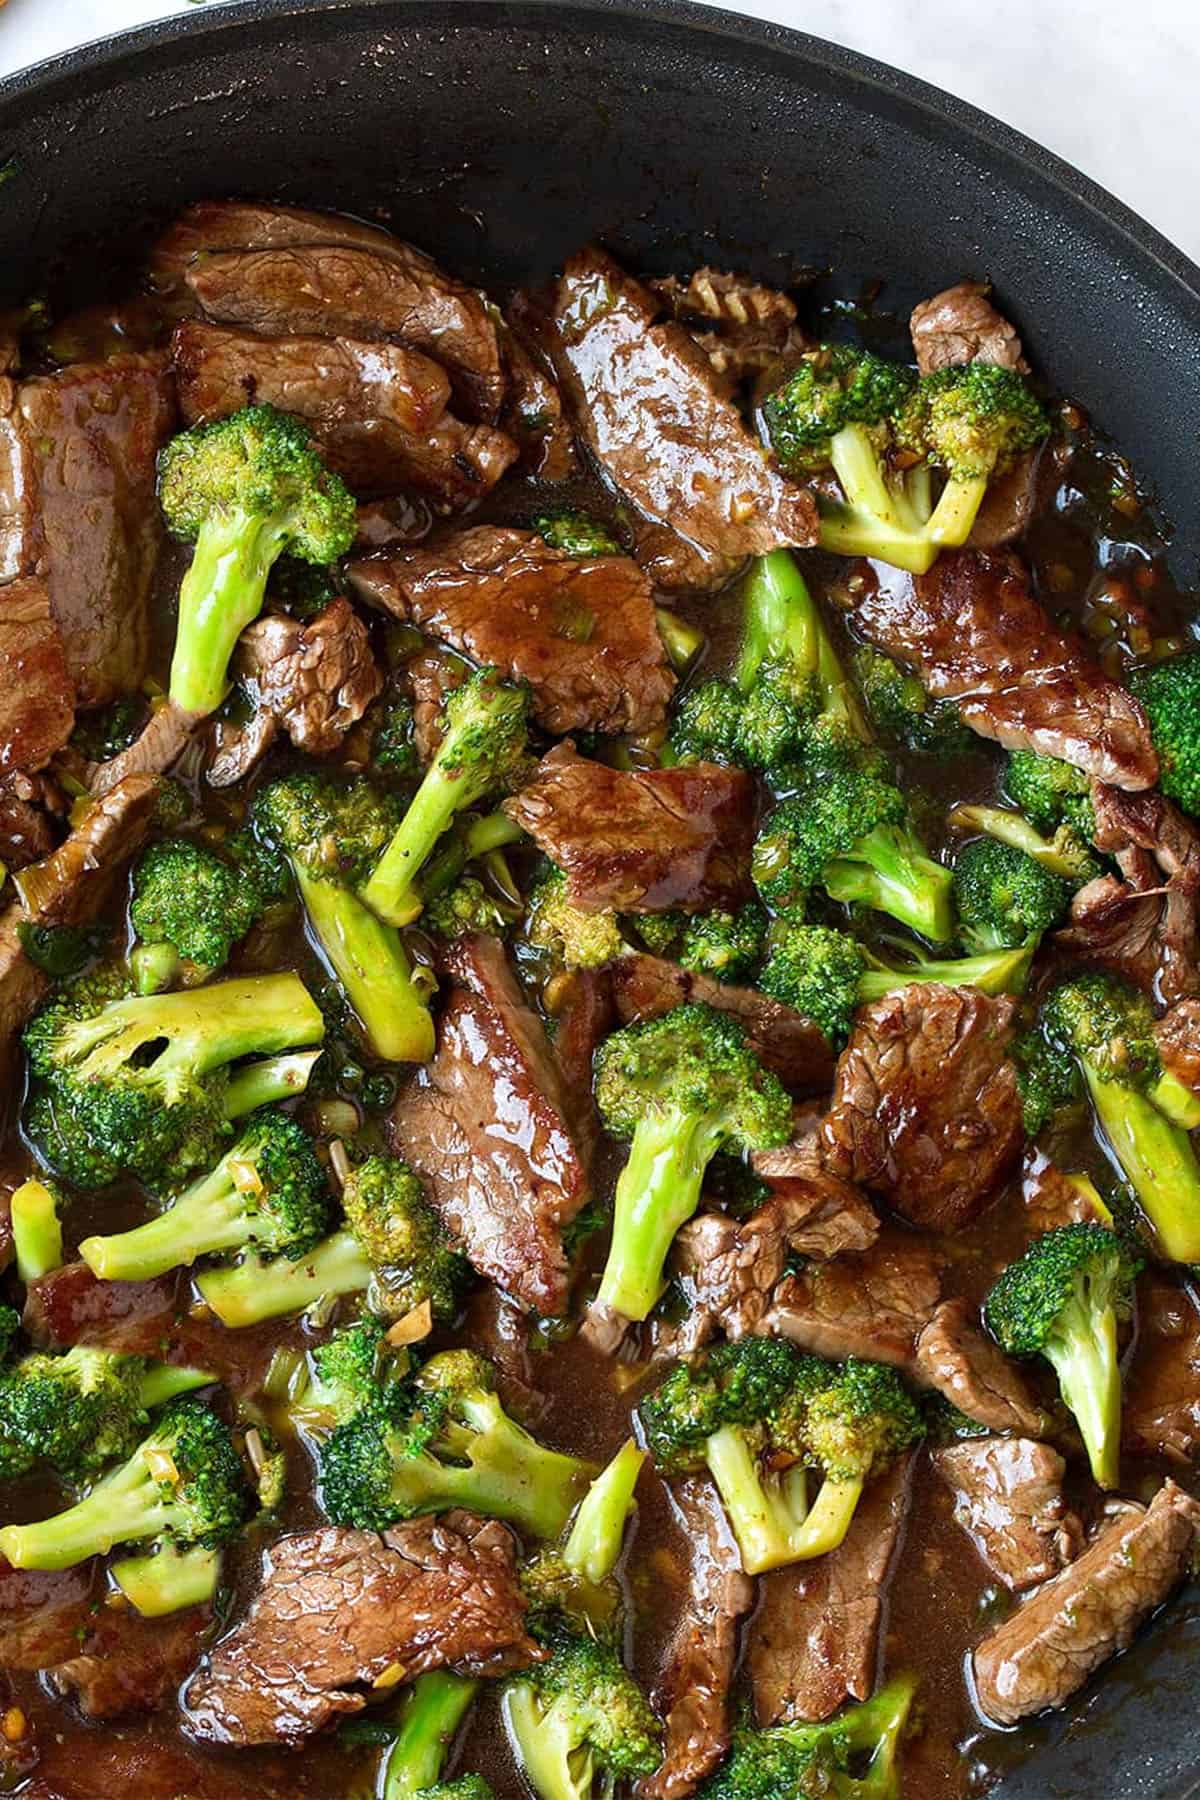 15 Delicious Broccoli and Beef – Easy Recipes To Make at Home